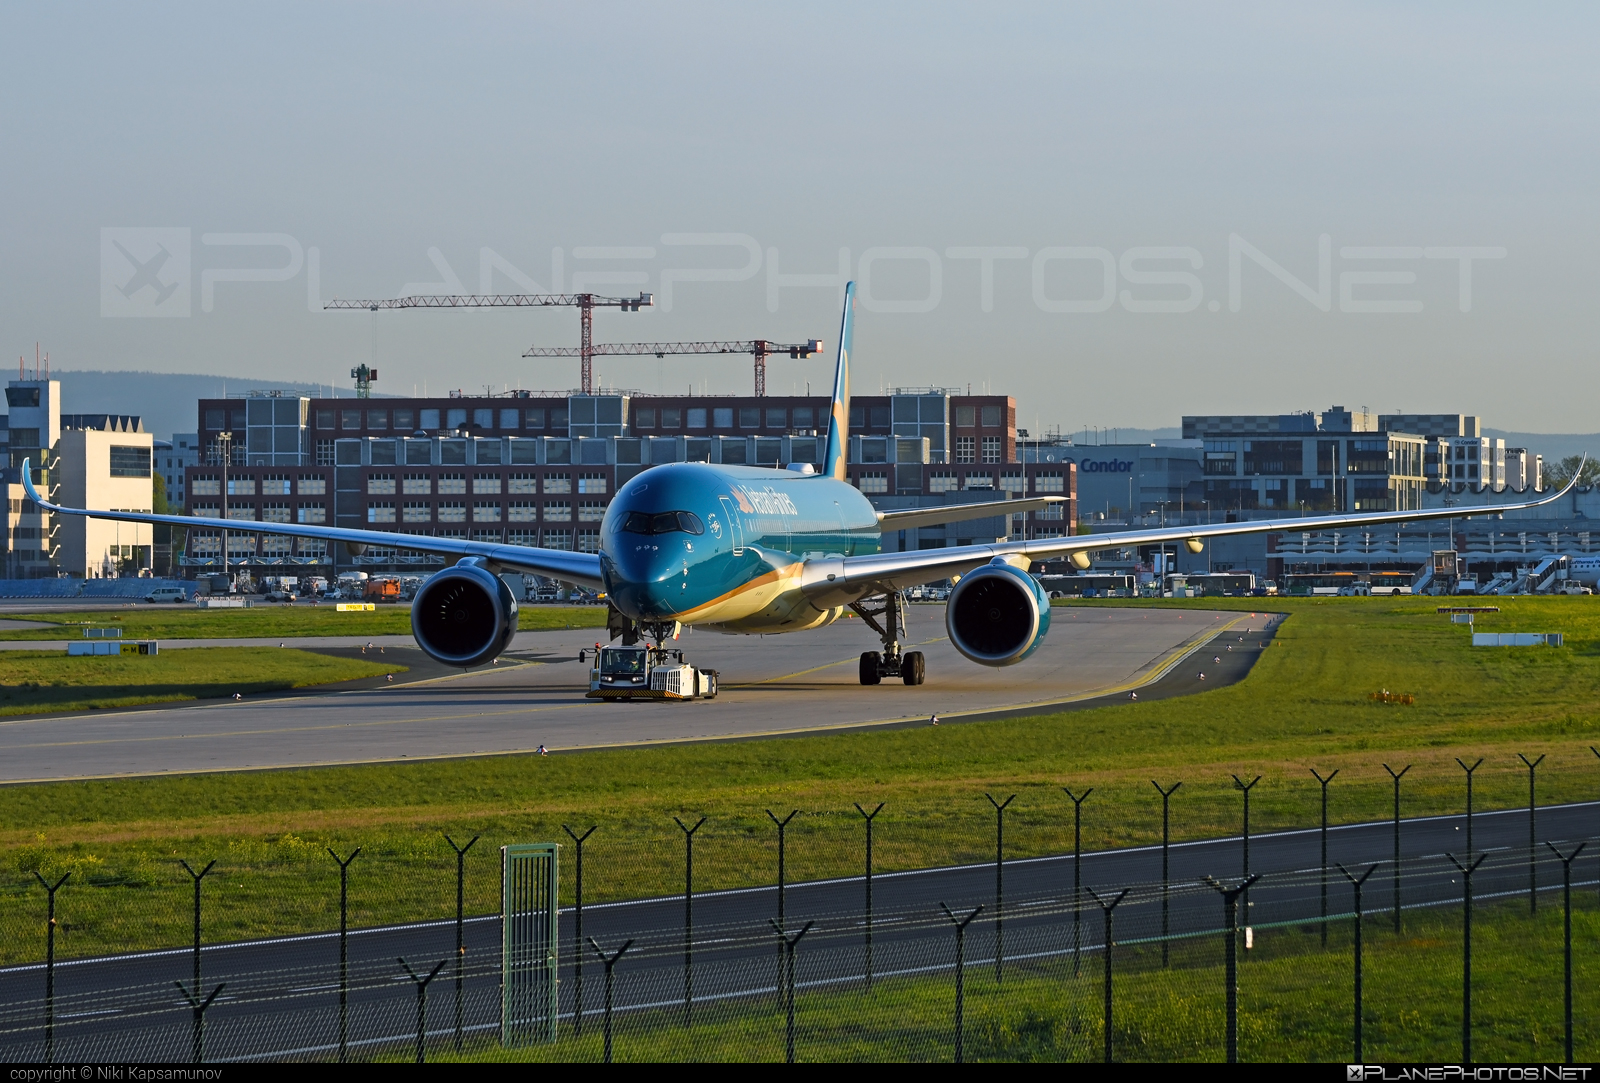 Airbus A350-941 - VN-A890 operated by Vietnam Airlines #a350 #a350family #airbus #airbus350 #xwb